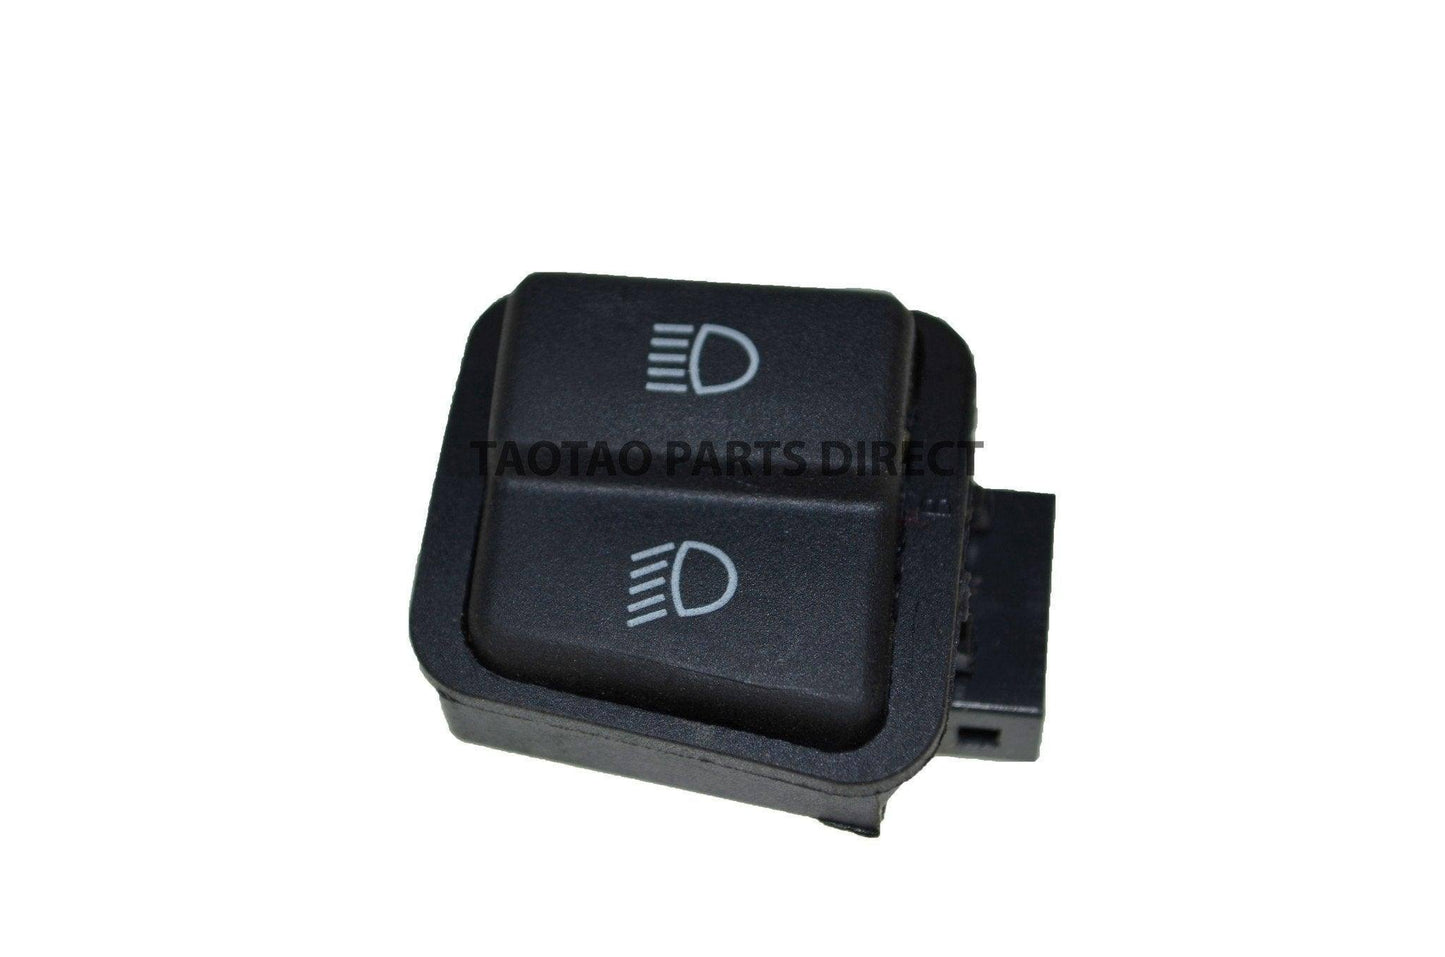 Scooter High Beam/Low Beam Switch - TaoTao Parts Direct